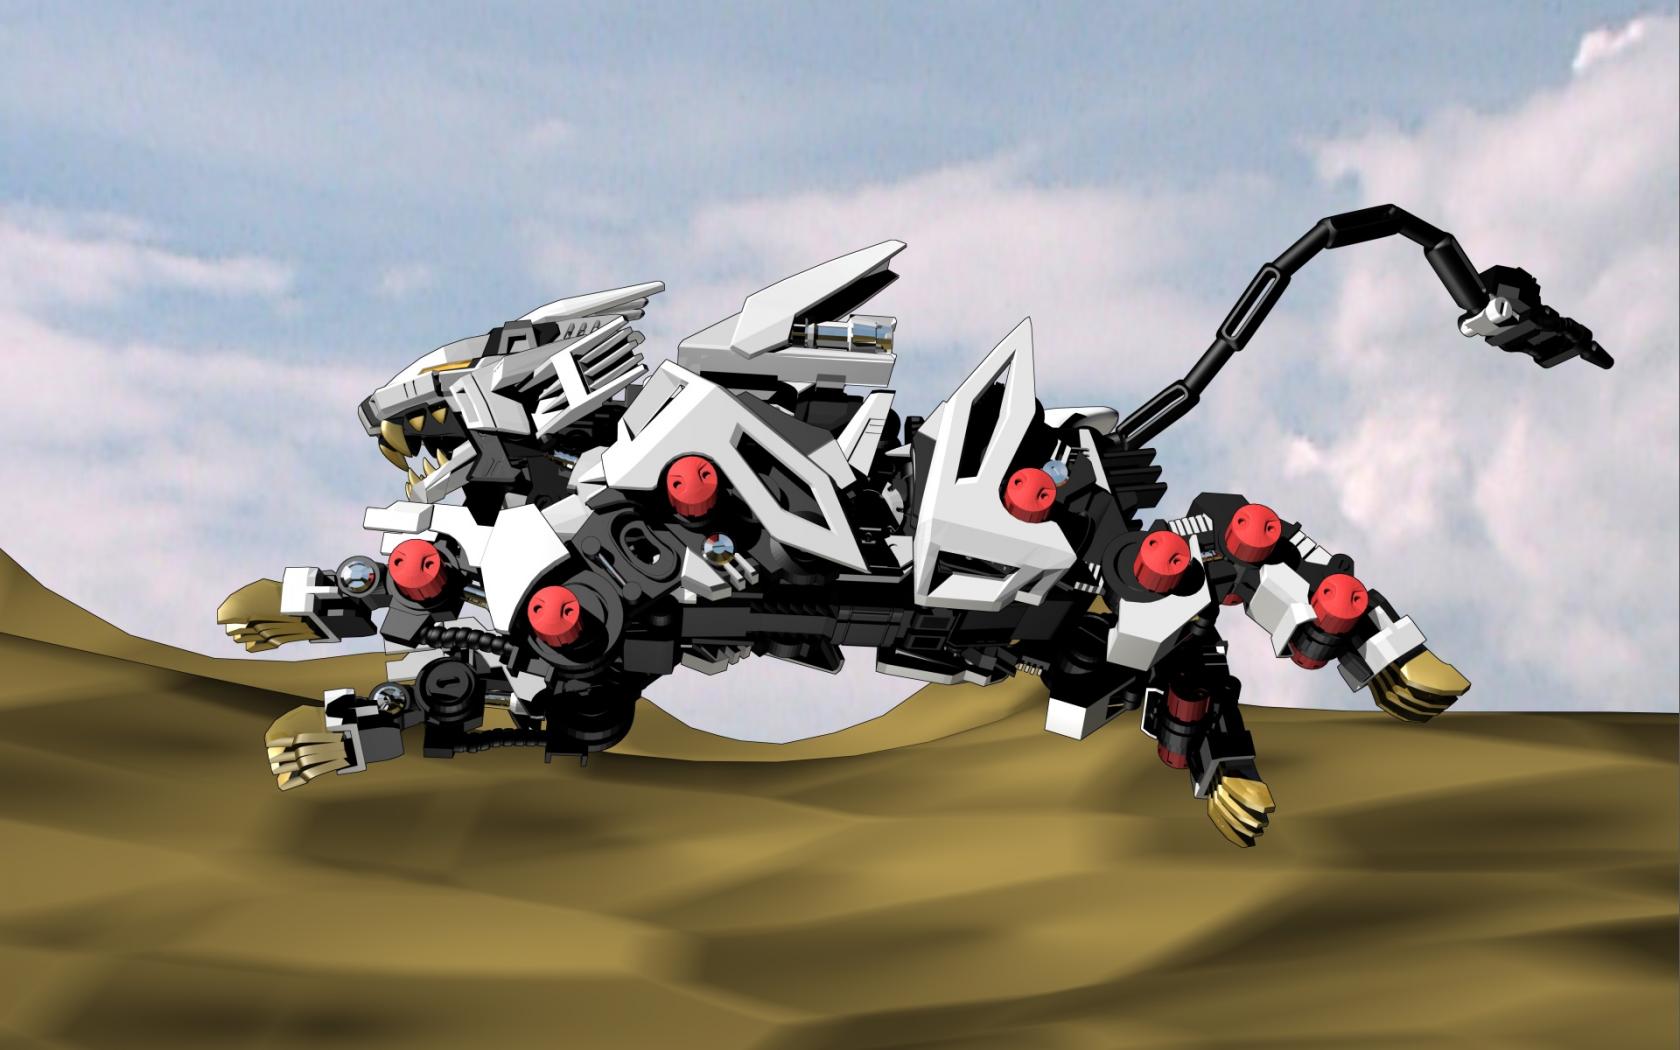 Zoids wallpaper - - High Quality and Resolution